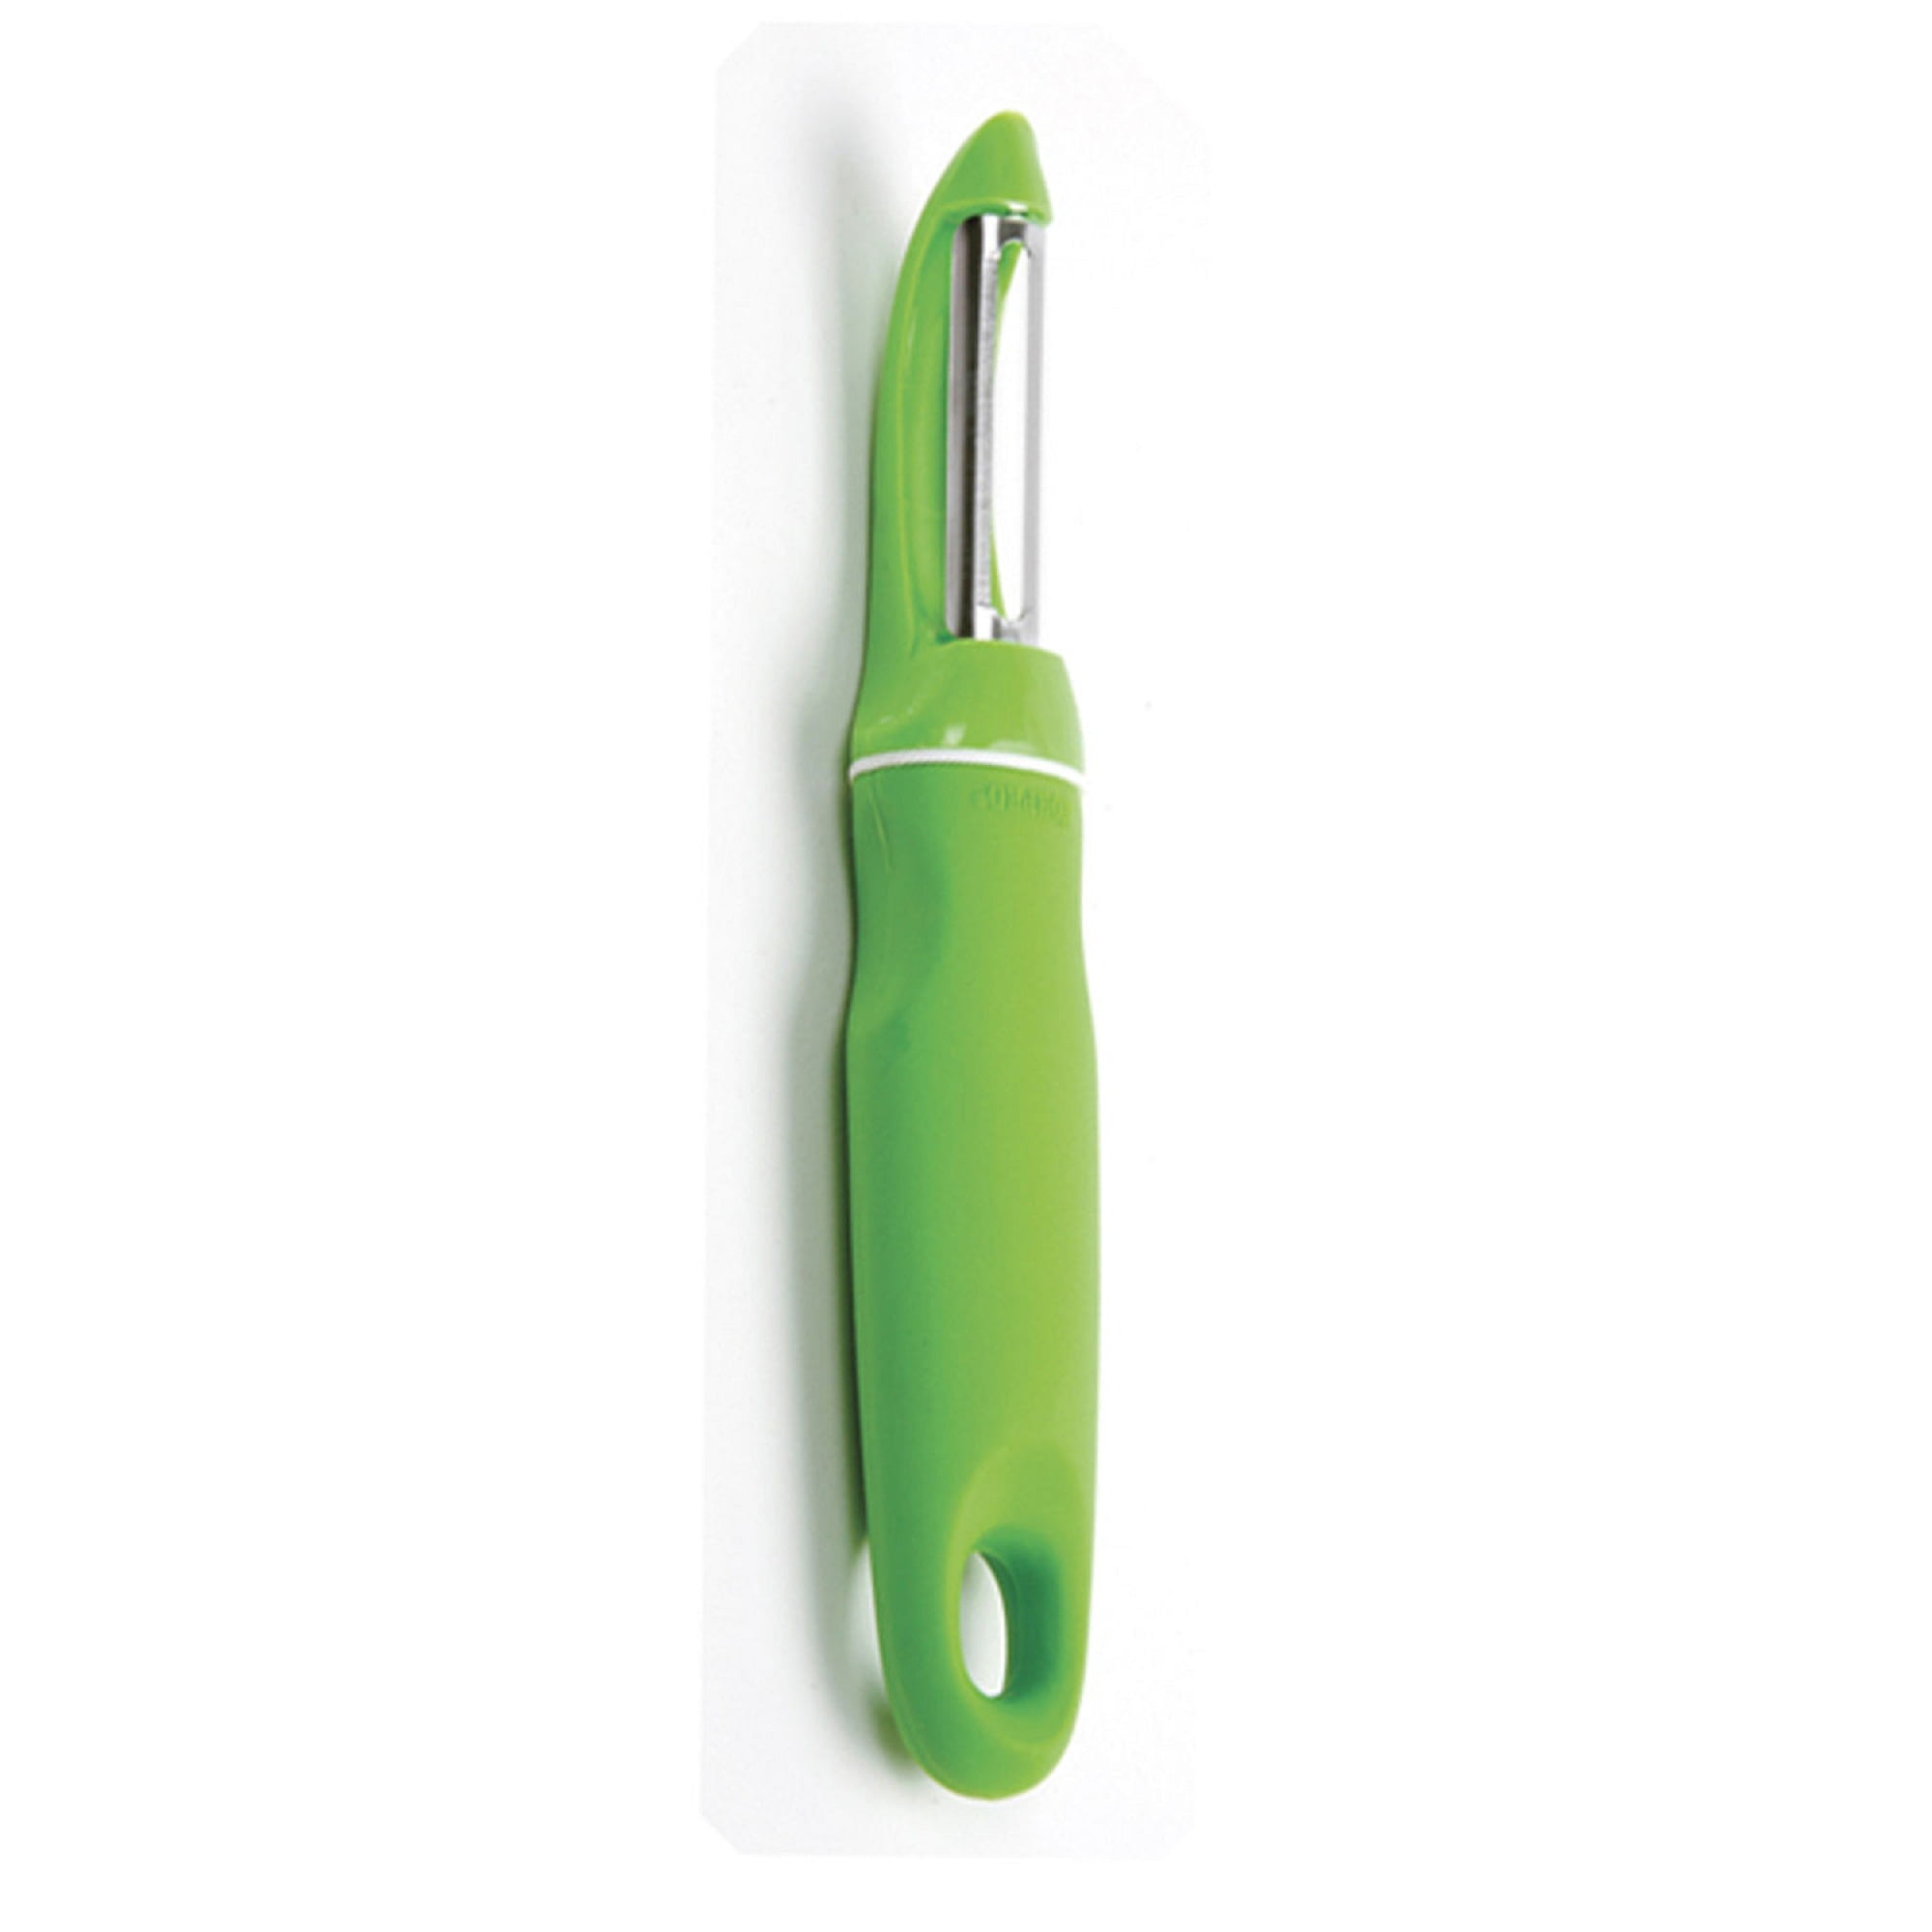 Norpro 1363 Stainless Steel Olive Stuffer, with Comfort Grips, 5.25, Green